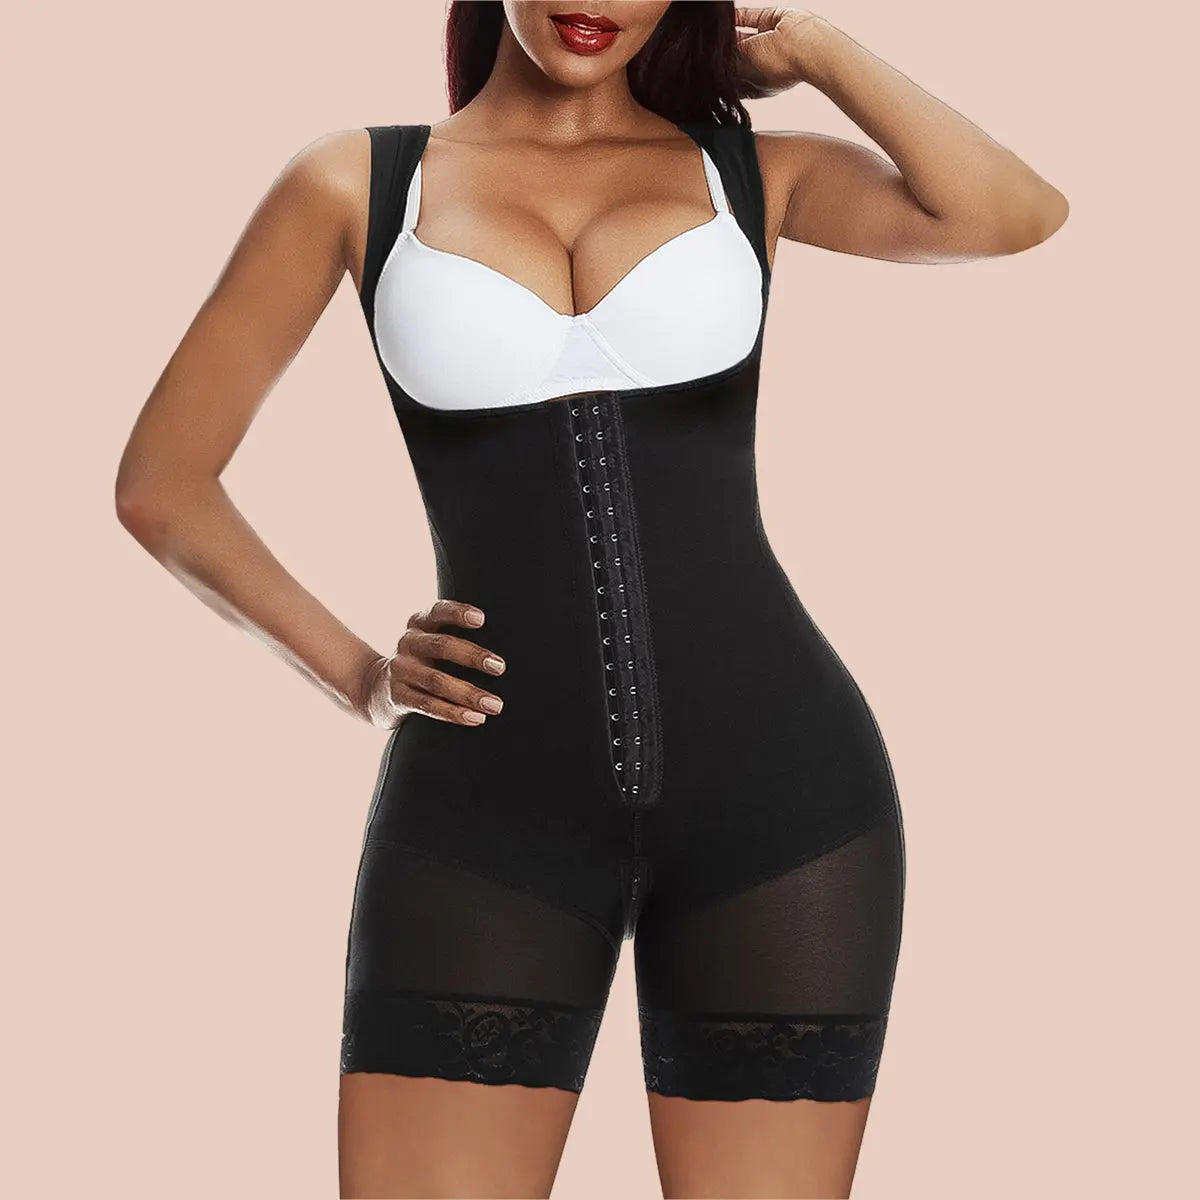 Fajas Colombianas Skims High Compression Full Body Shaper Girdle Bust For  Daily Post-surgical Use Tummy Control Shapewear Corset - Shapers -  AliExpress